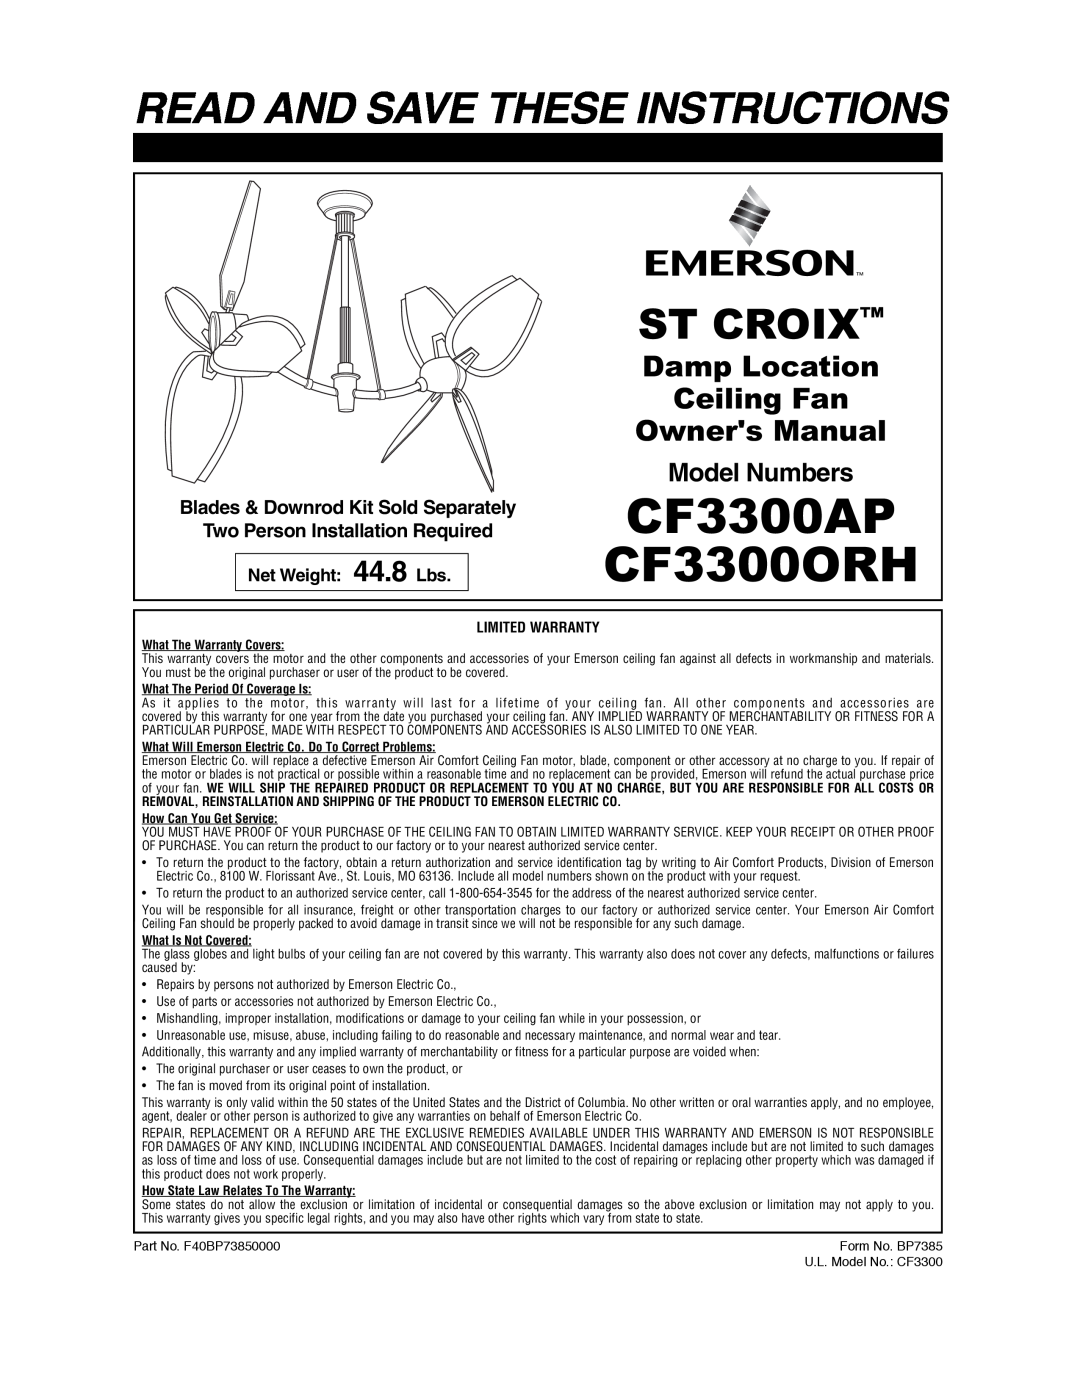 Emerson CF3300ORH warranty CF3300AP, Read And Save These Instructions, St Croix, Damp Location, Ceiling Fan, Model Numbers 